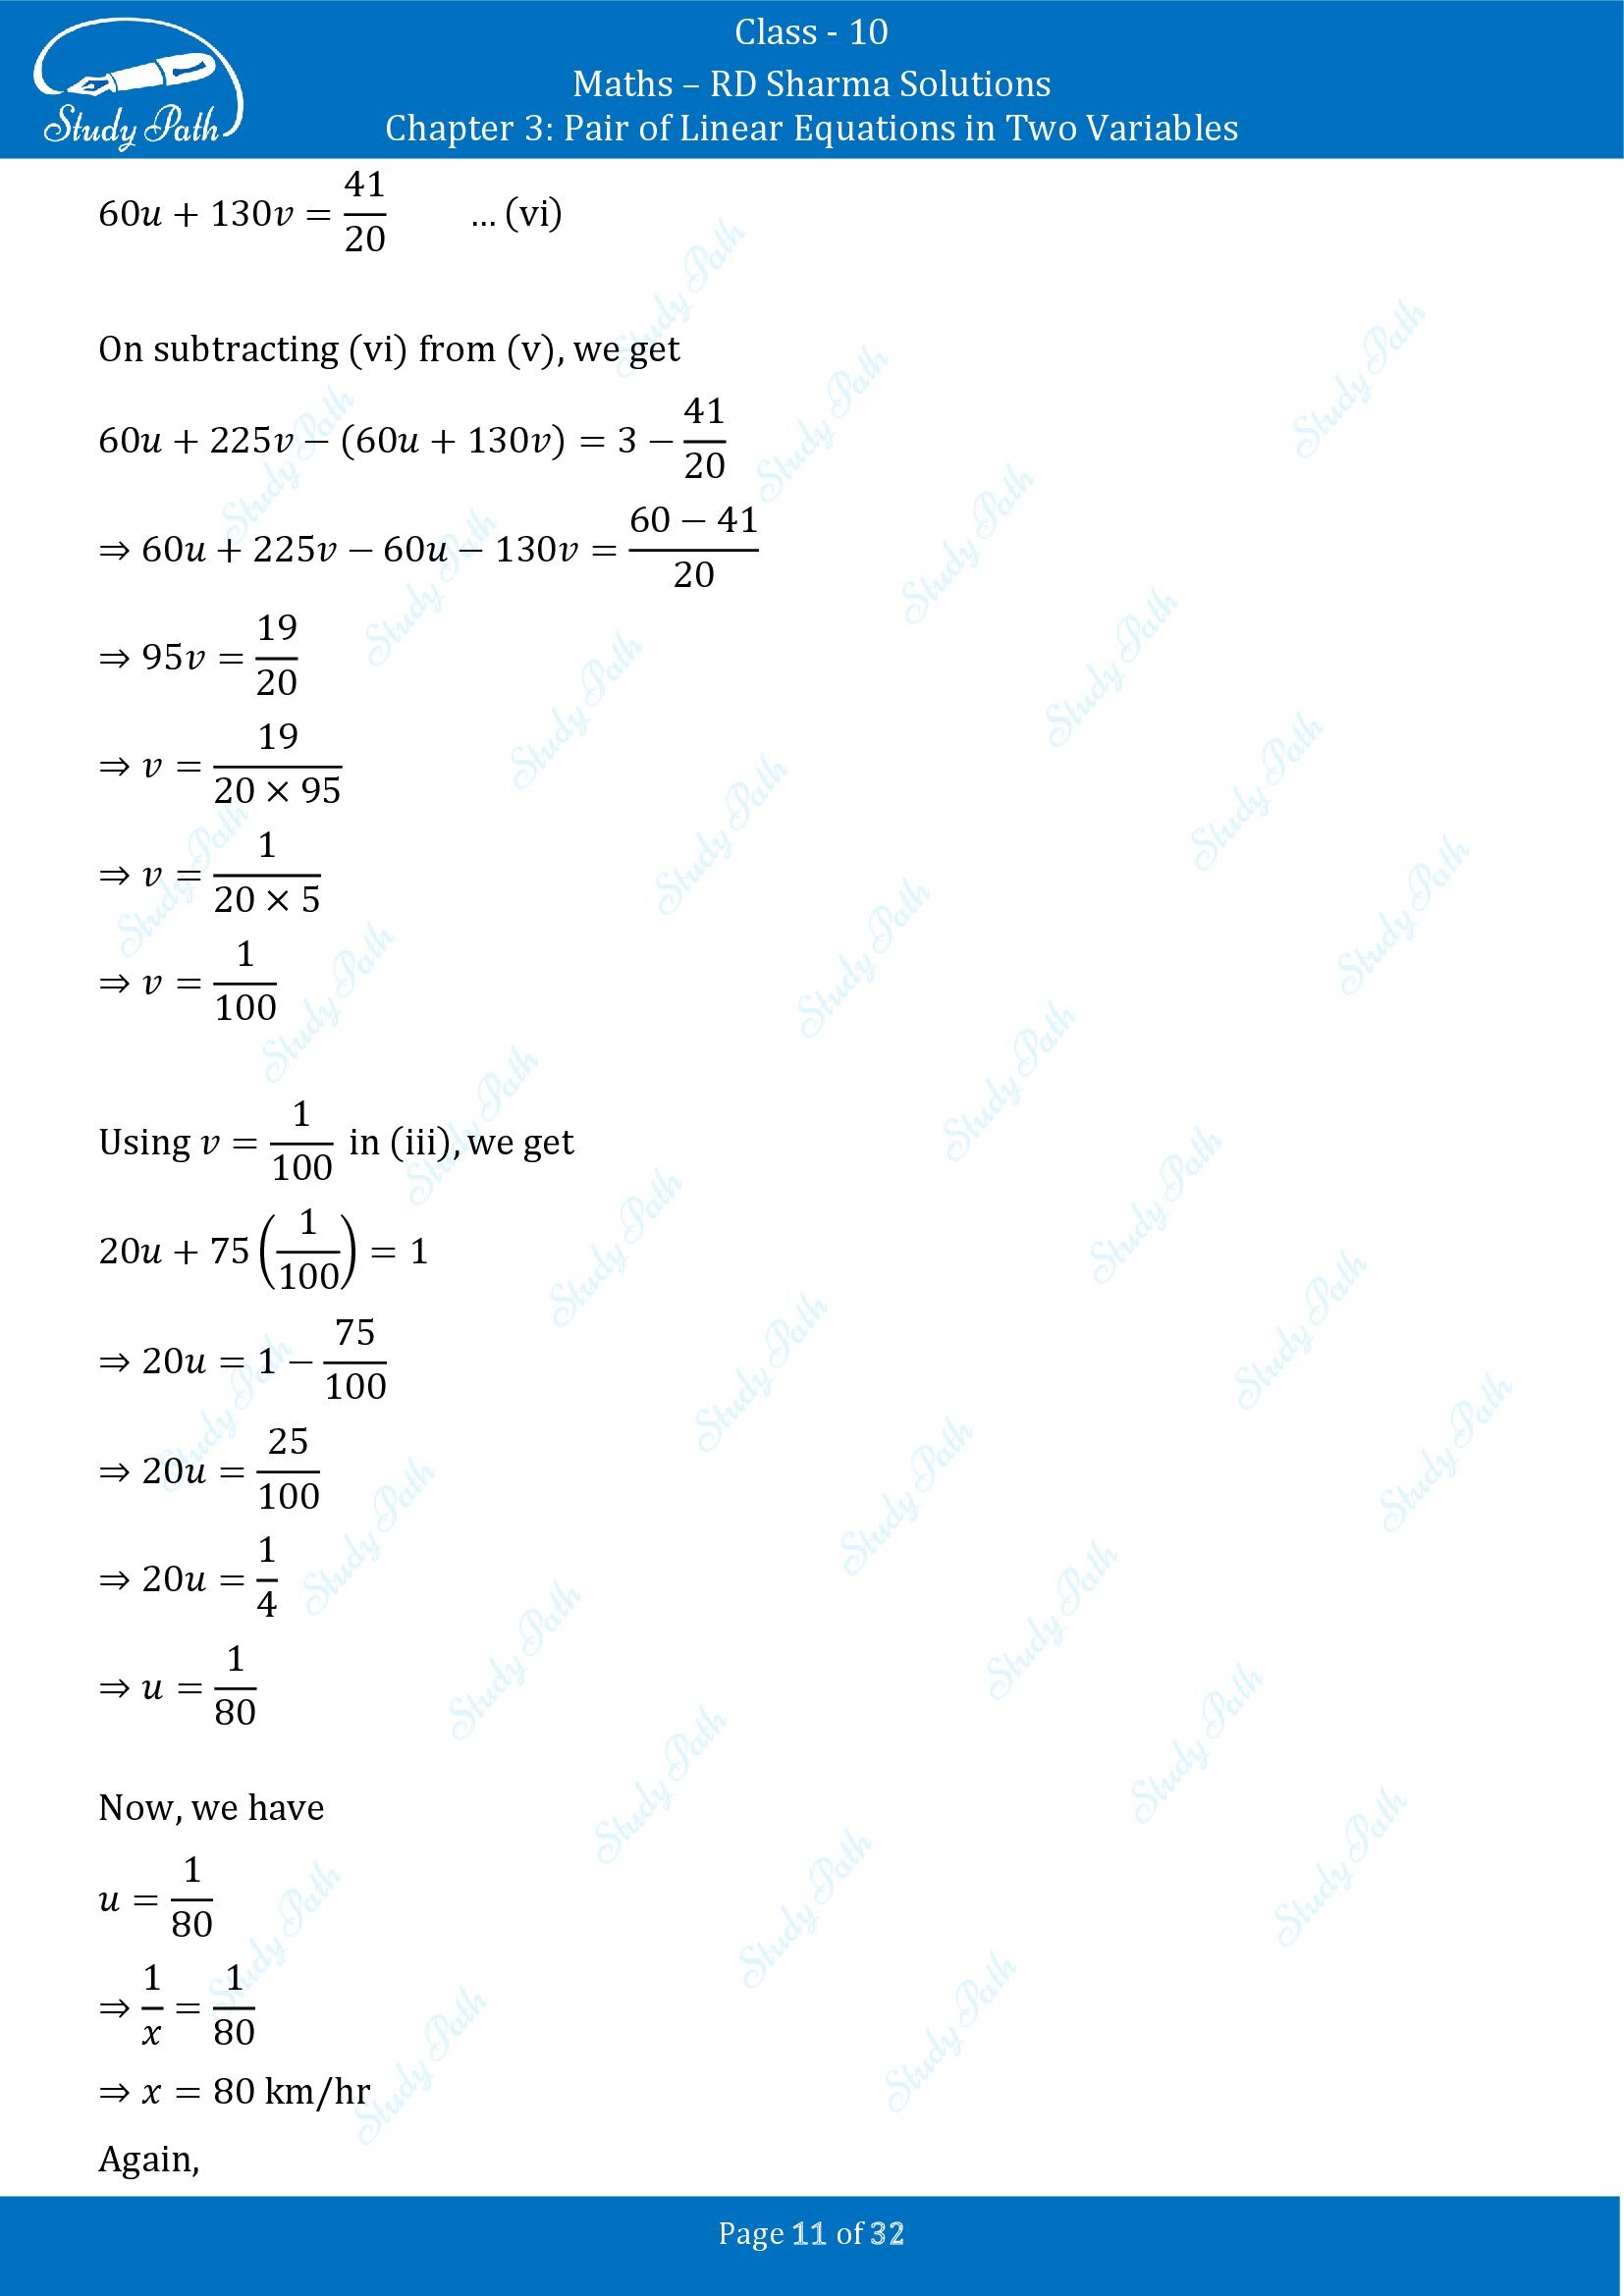 RD Sharma Solutions Class 10 Chapter 3 Pair of Linear Equations in Two Variables Exercise 3.10 00011